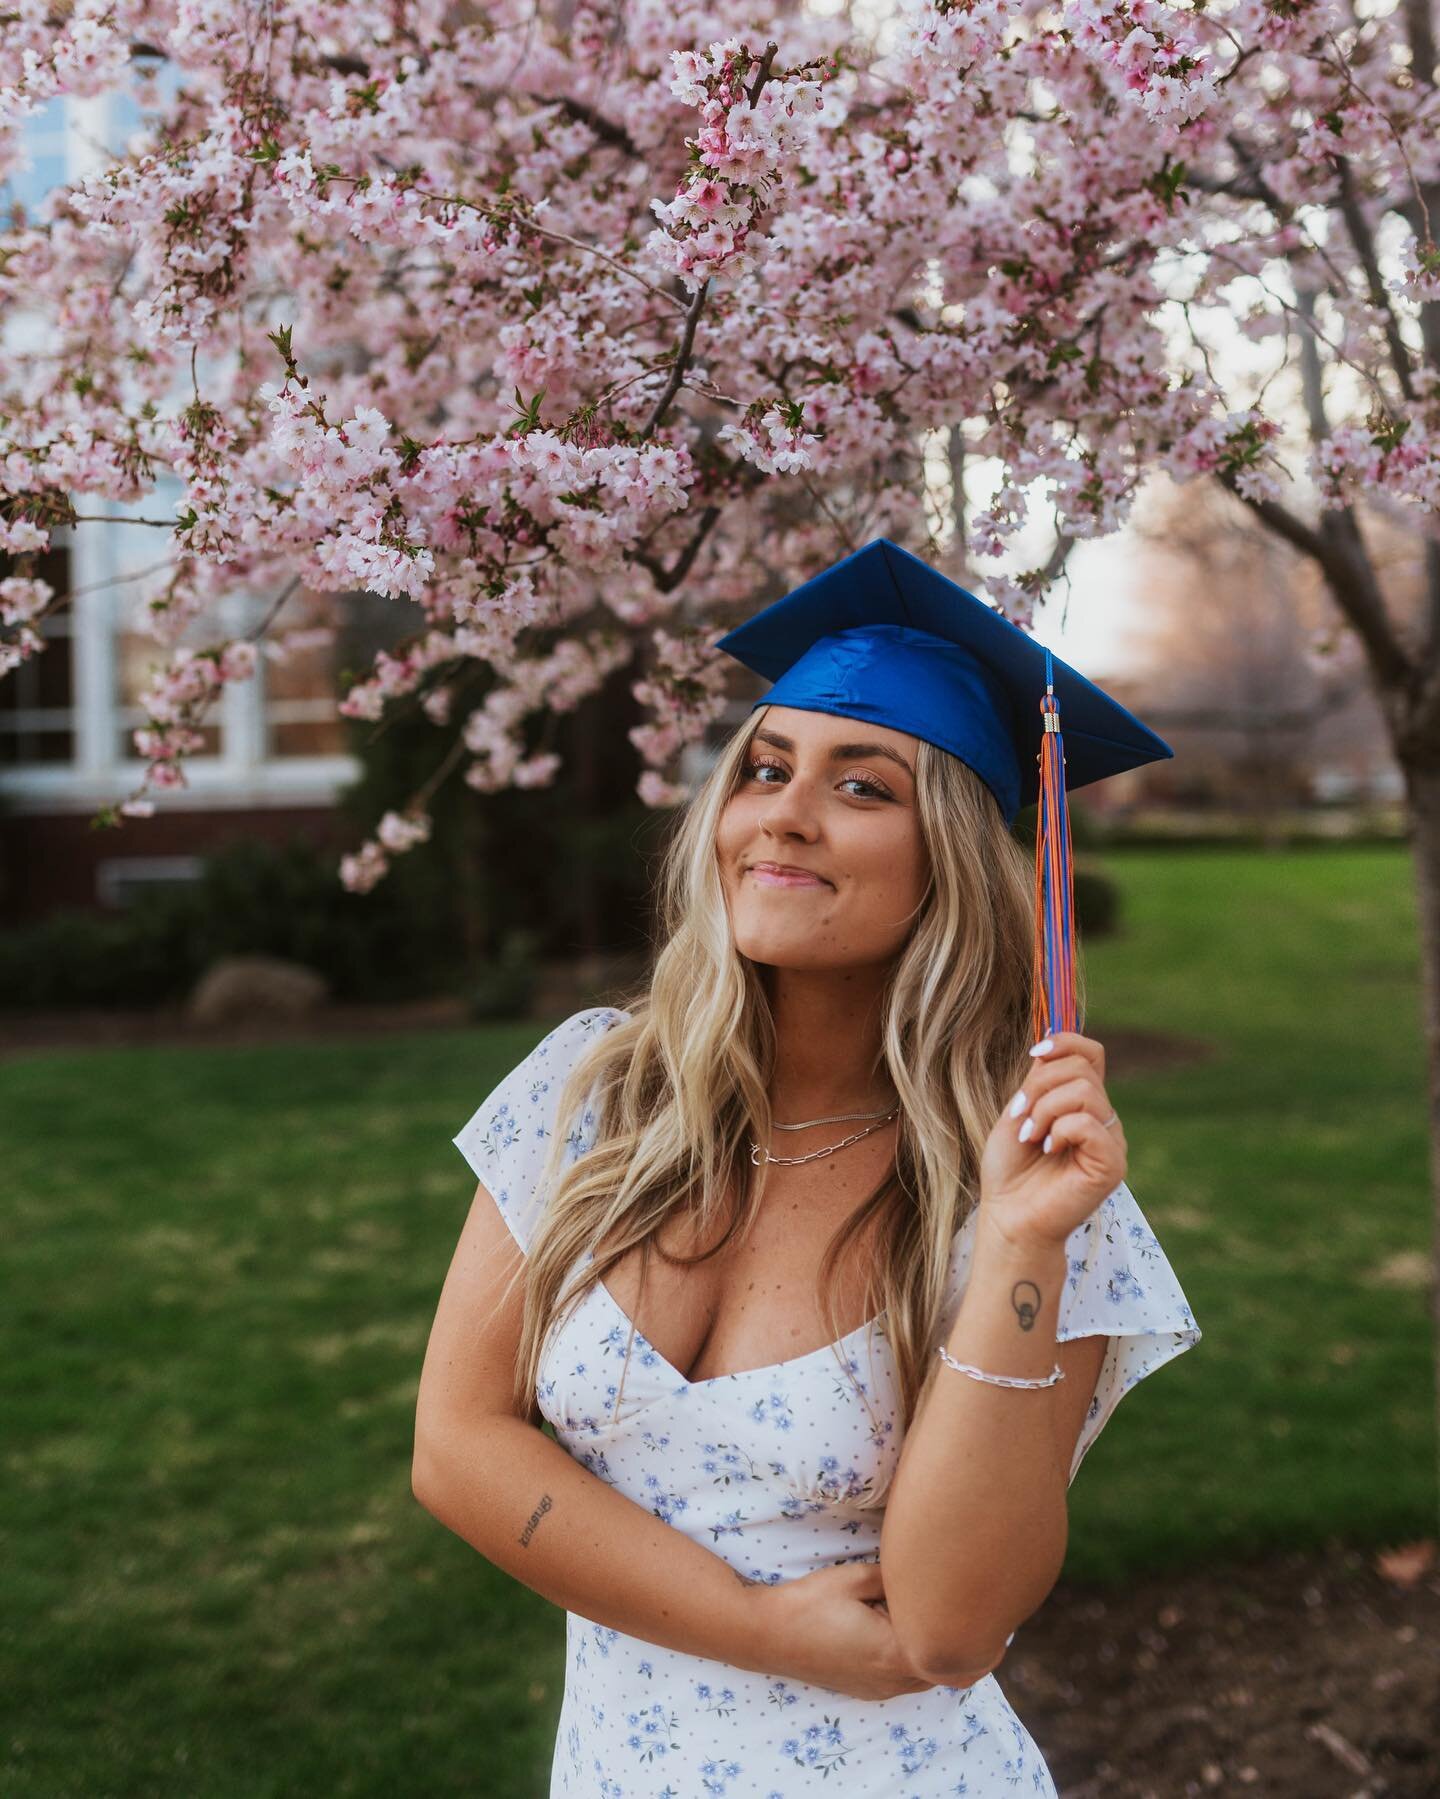 Spring has sprung and I&rsquo;m here for it. No more snow please ☀️💐🎓😆

#boisestategrad #capandgown #boisestategraduation #graduationphotos #boisephotographer #collegegrad #seniorphotos #gradphotographer #gradphotos